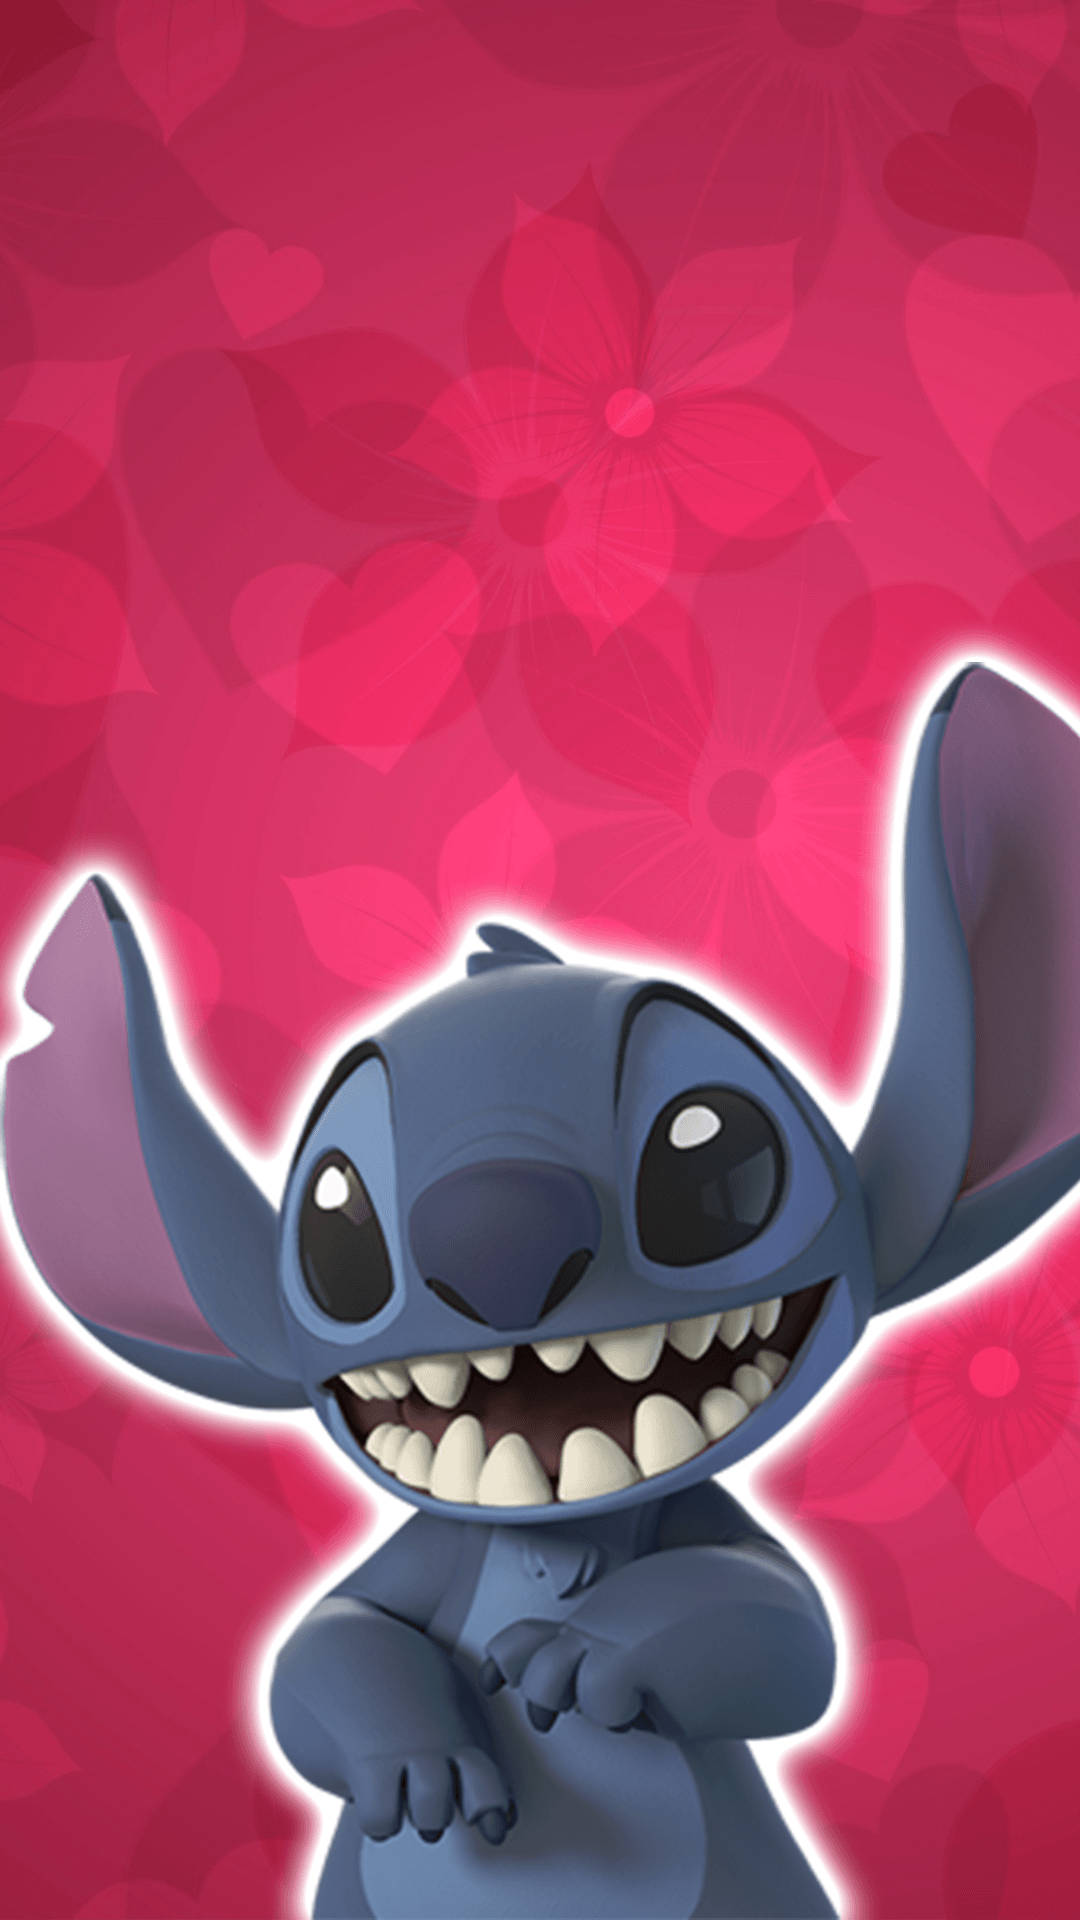 Smiling Stitch 3d Rendered Wallpaper